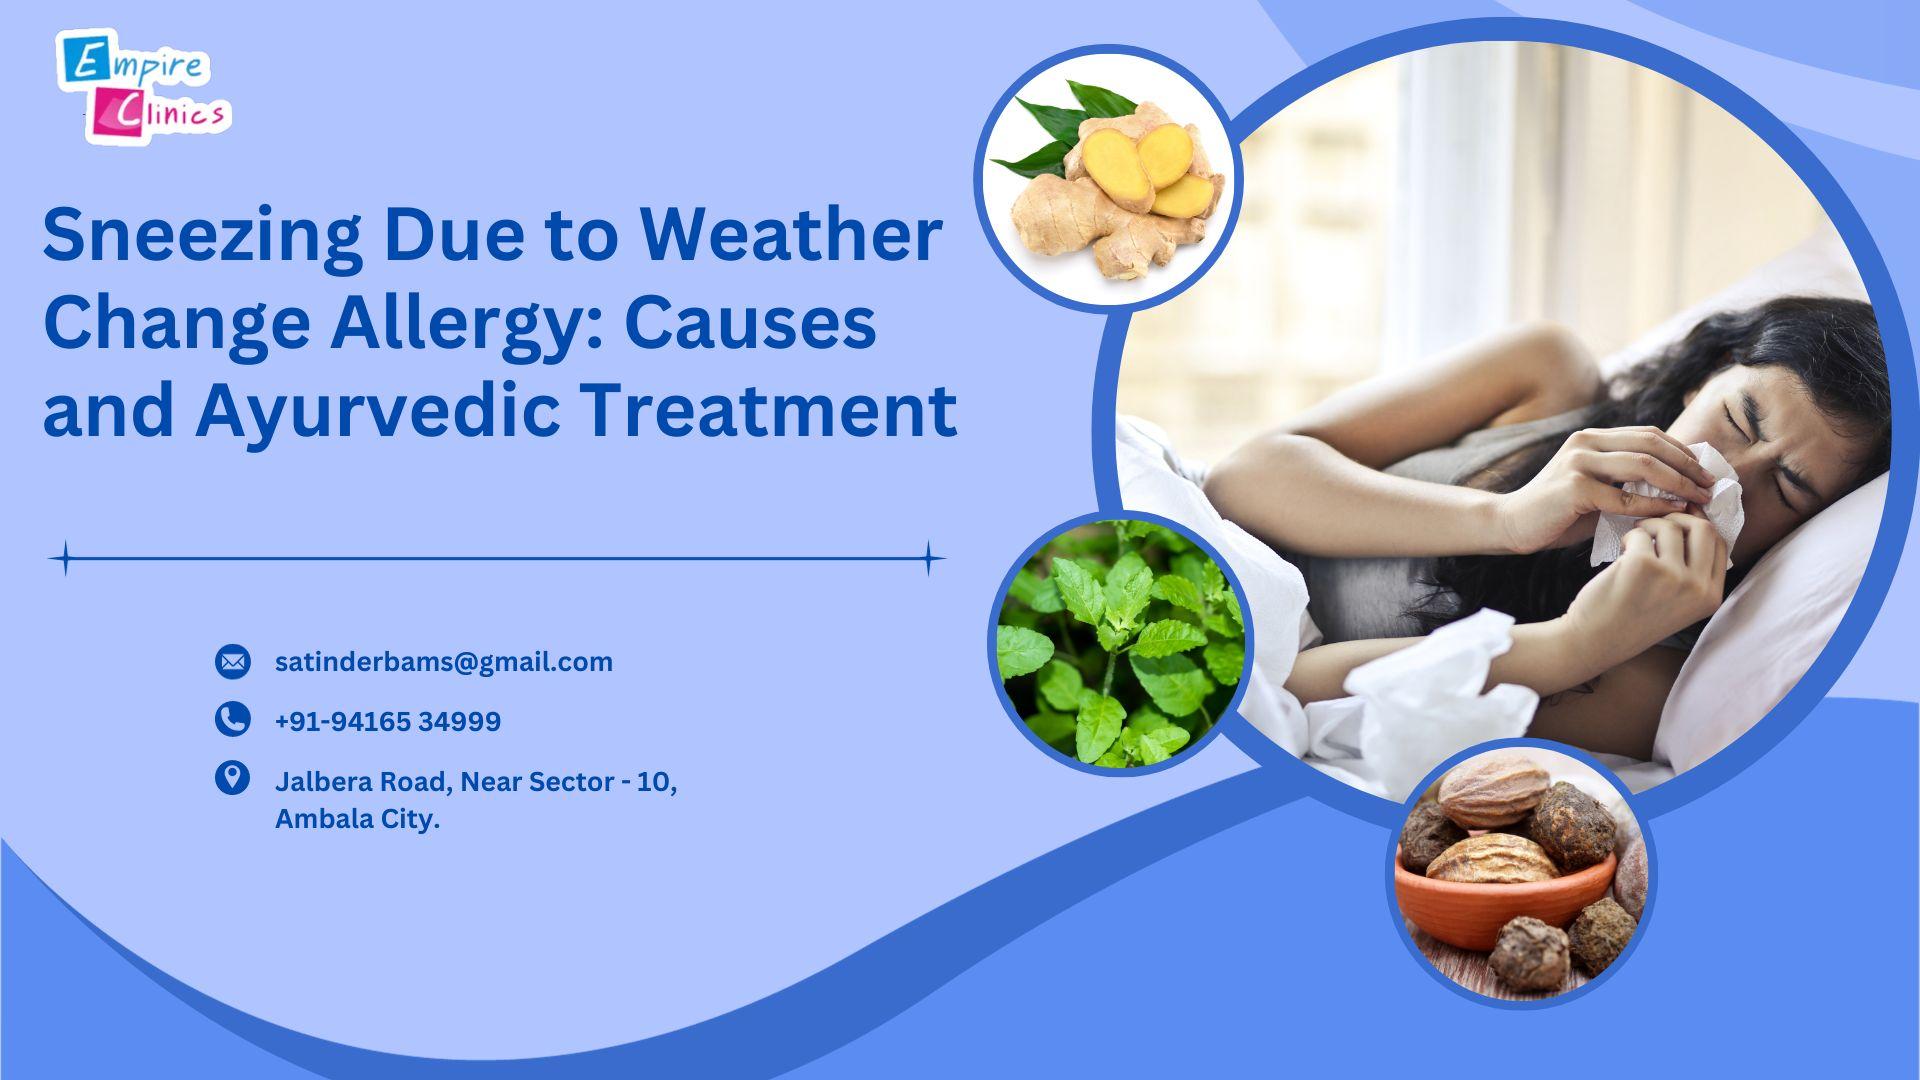 Sneezing Due to Weather Change Allergy: Causes and Ayurvedic Treatment